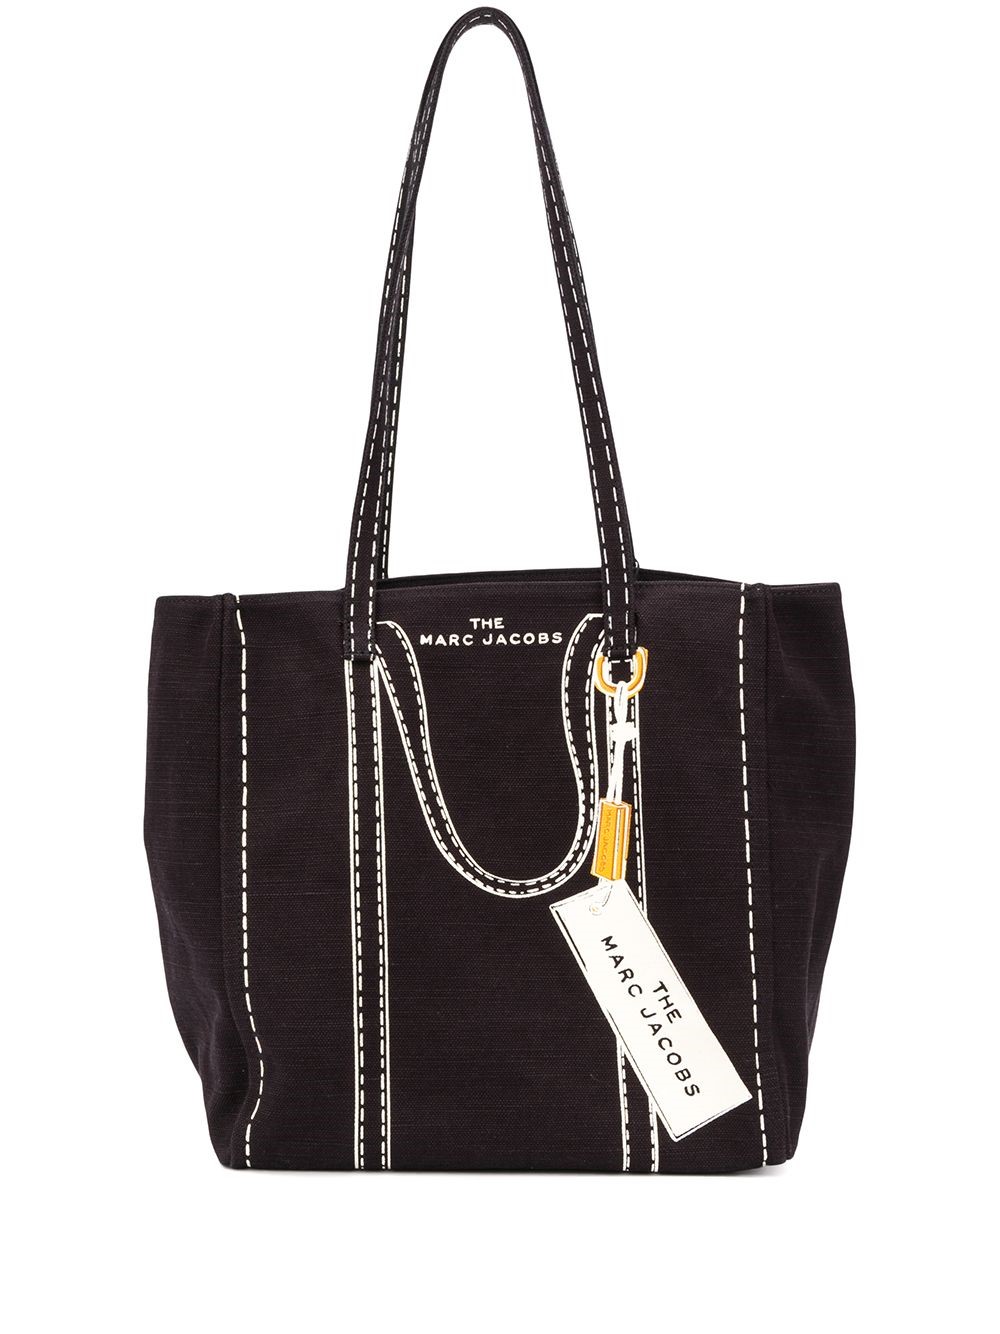 marc jacobs THE TAG 27 TOTE BAG available on 0 - 32794